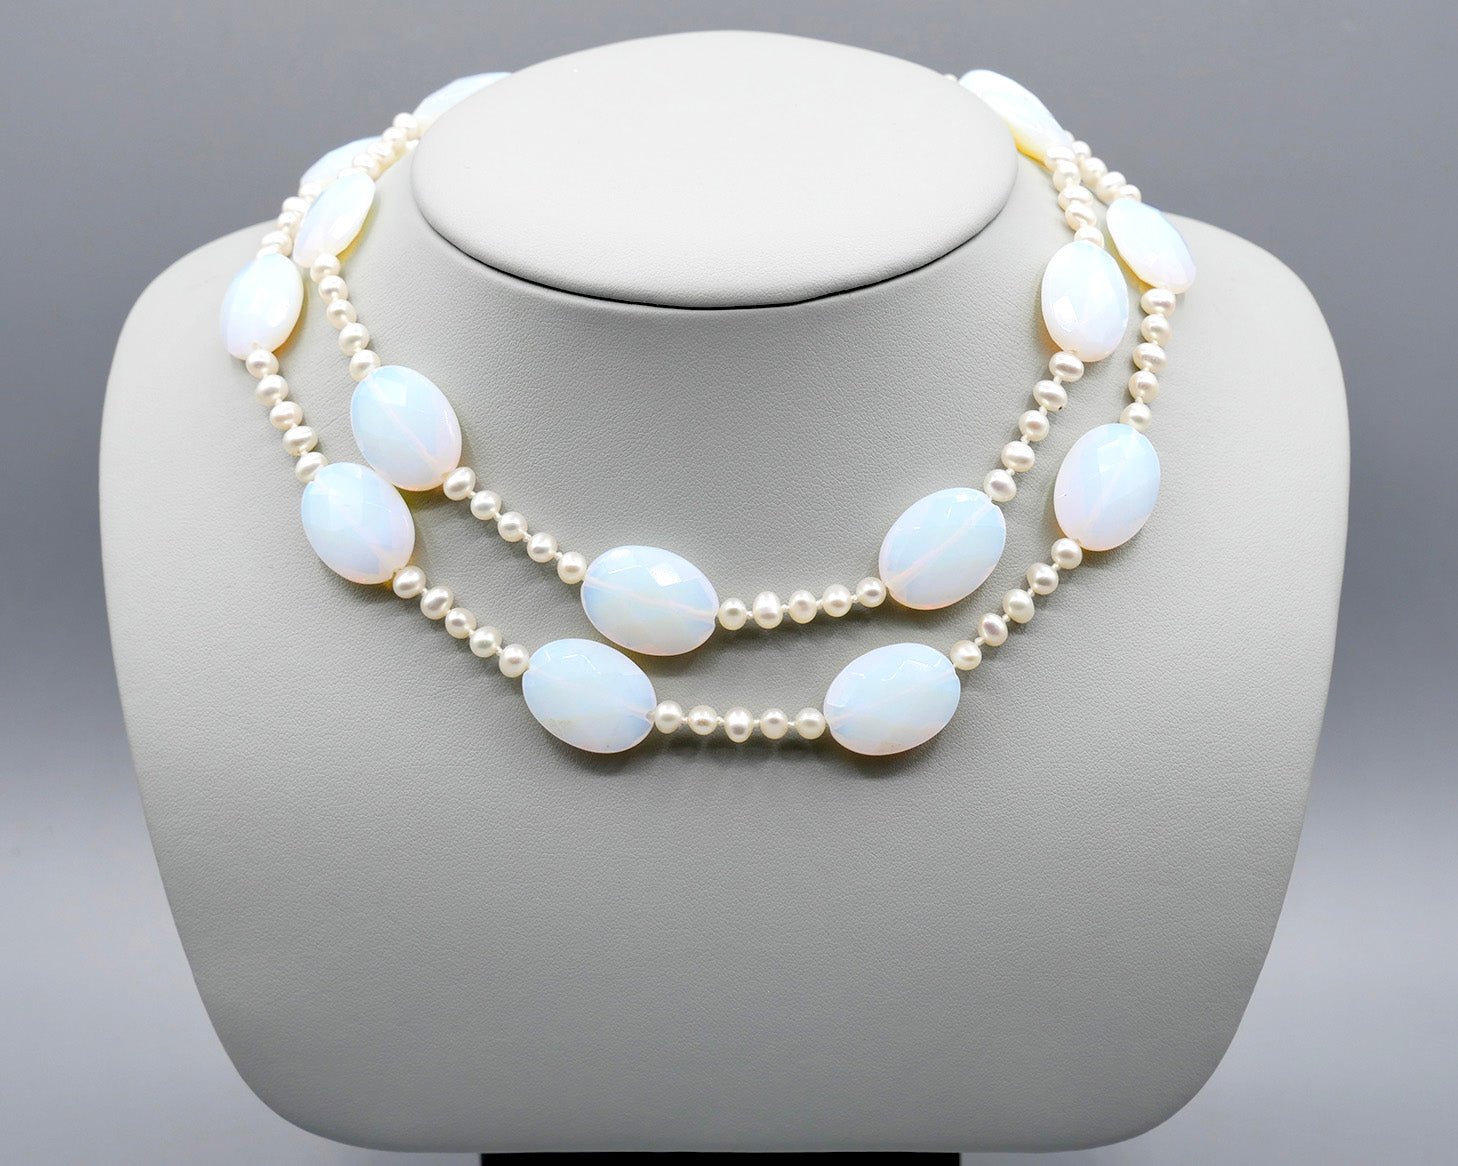 Fresh Water Pearl/Chalcedony Necklace